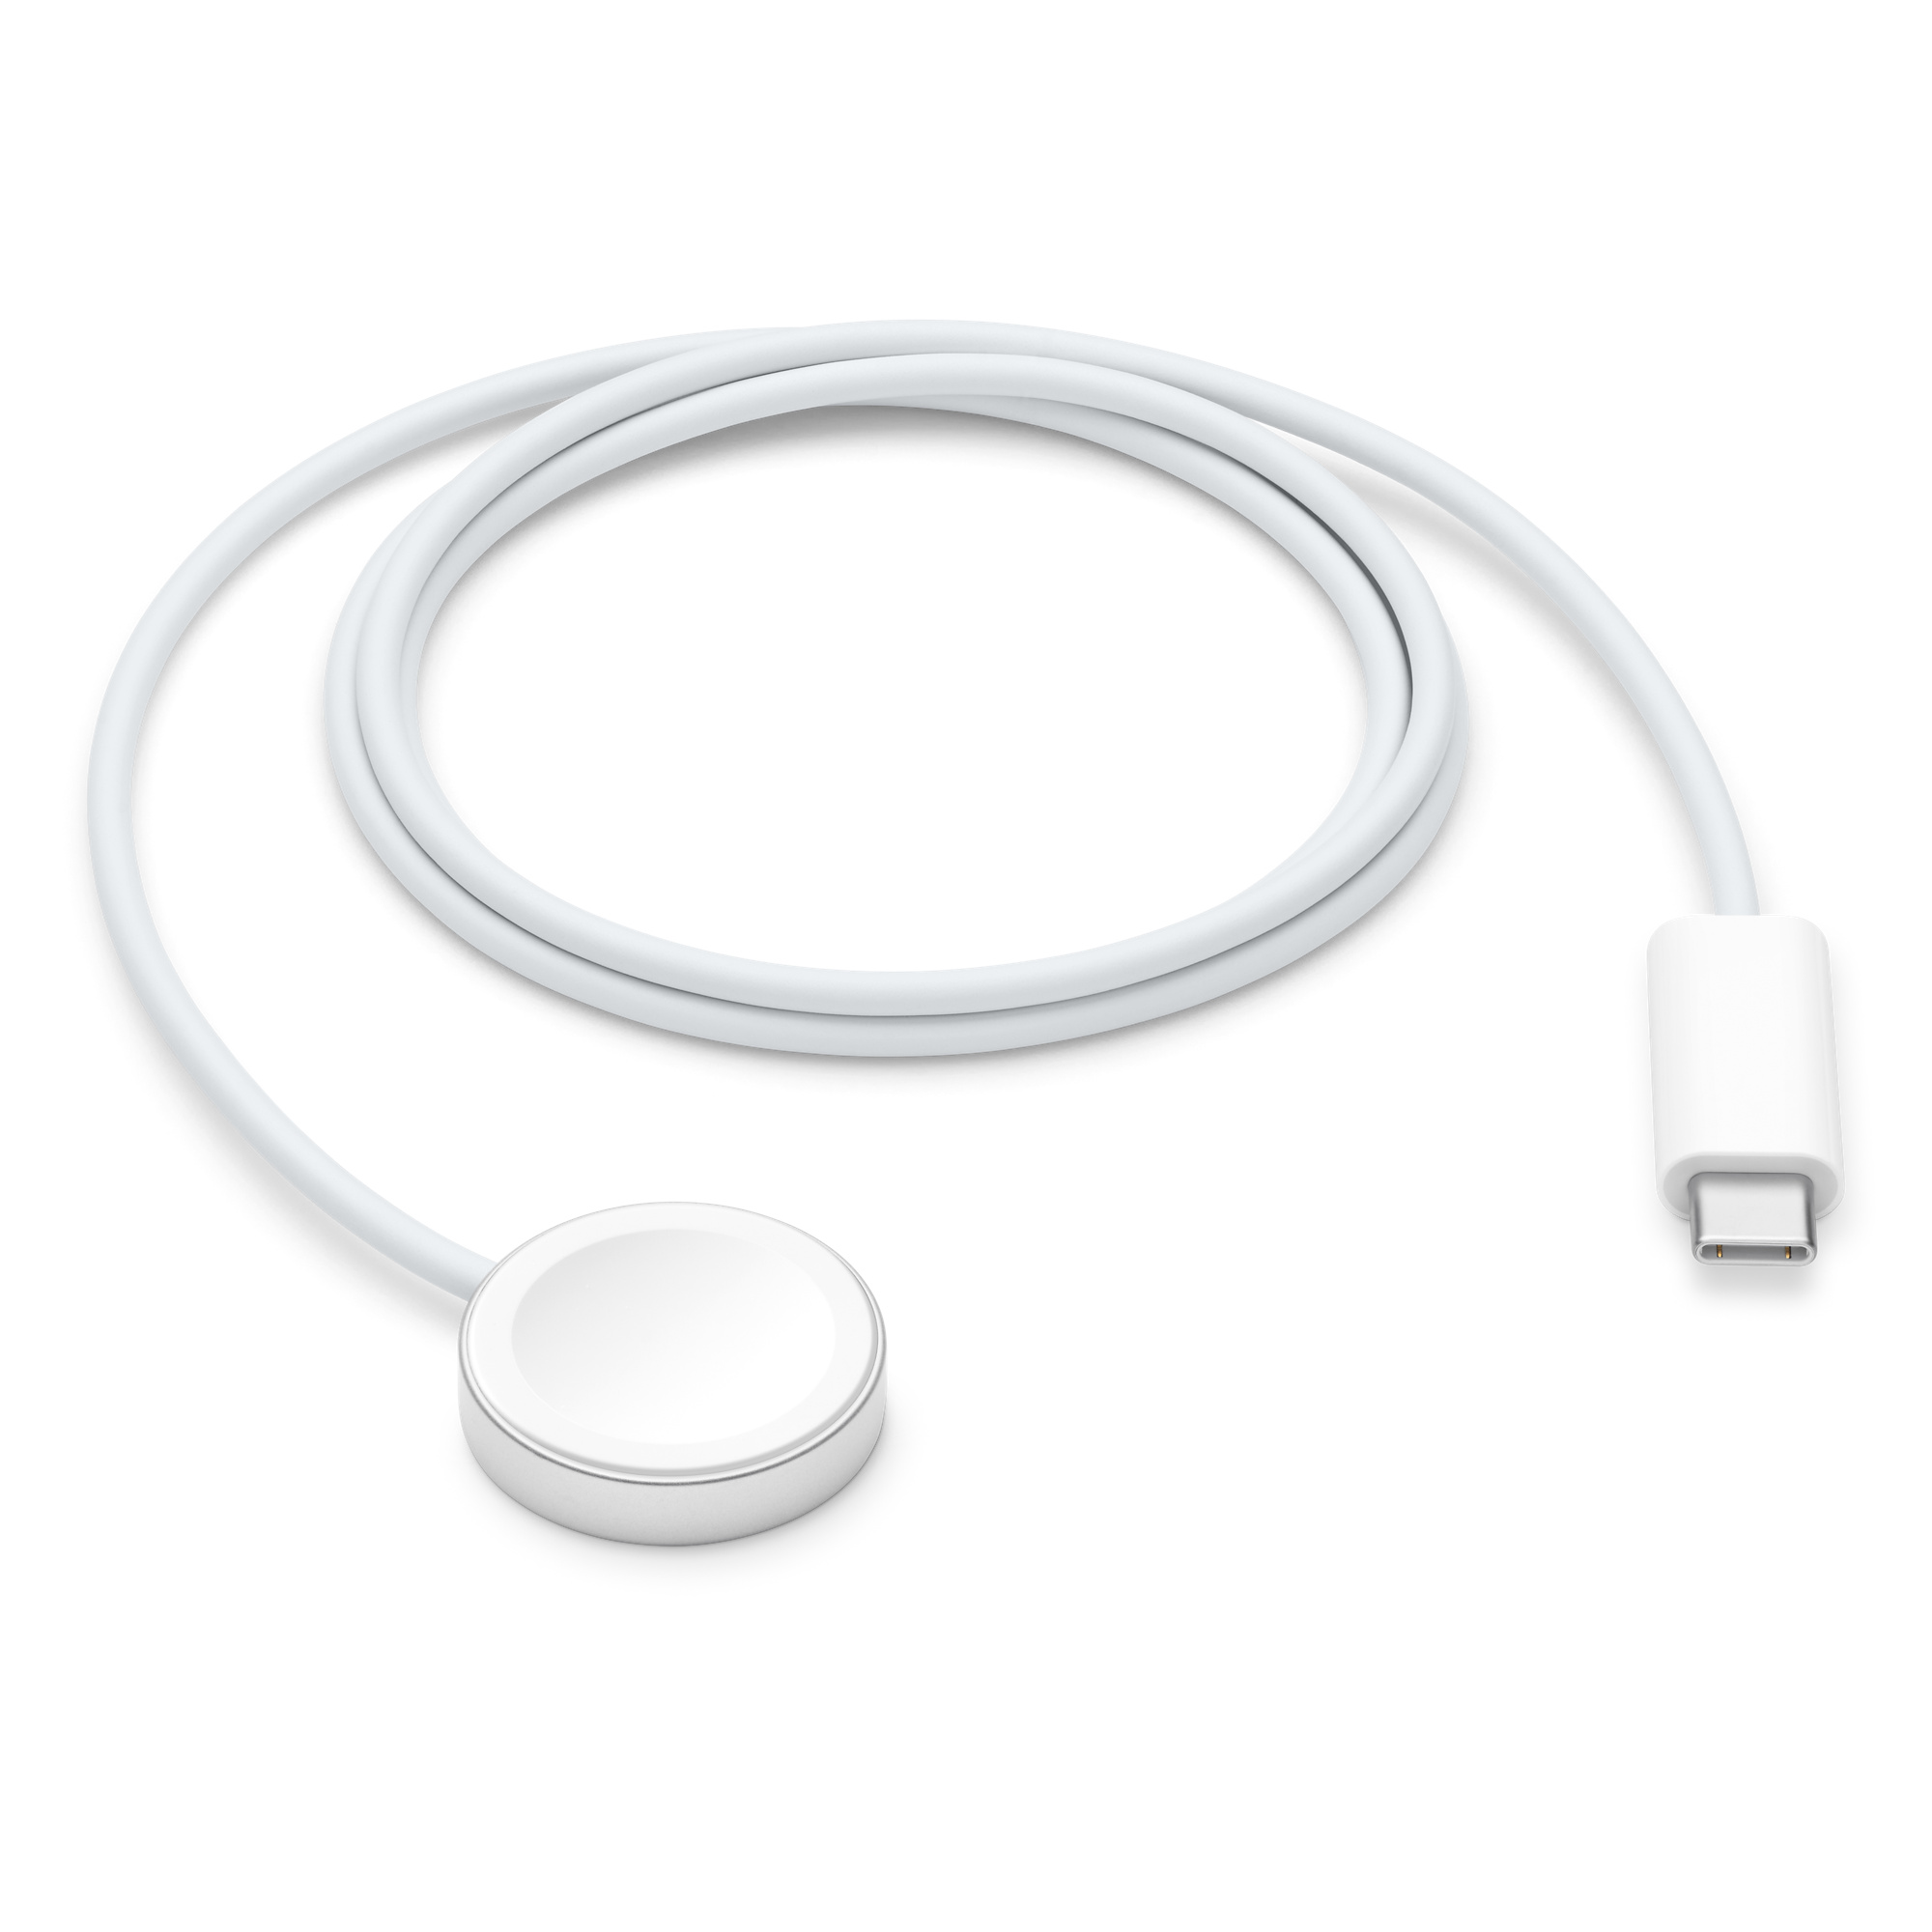 APPLE USB C IWATCH CHARGER (1M)